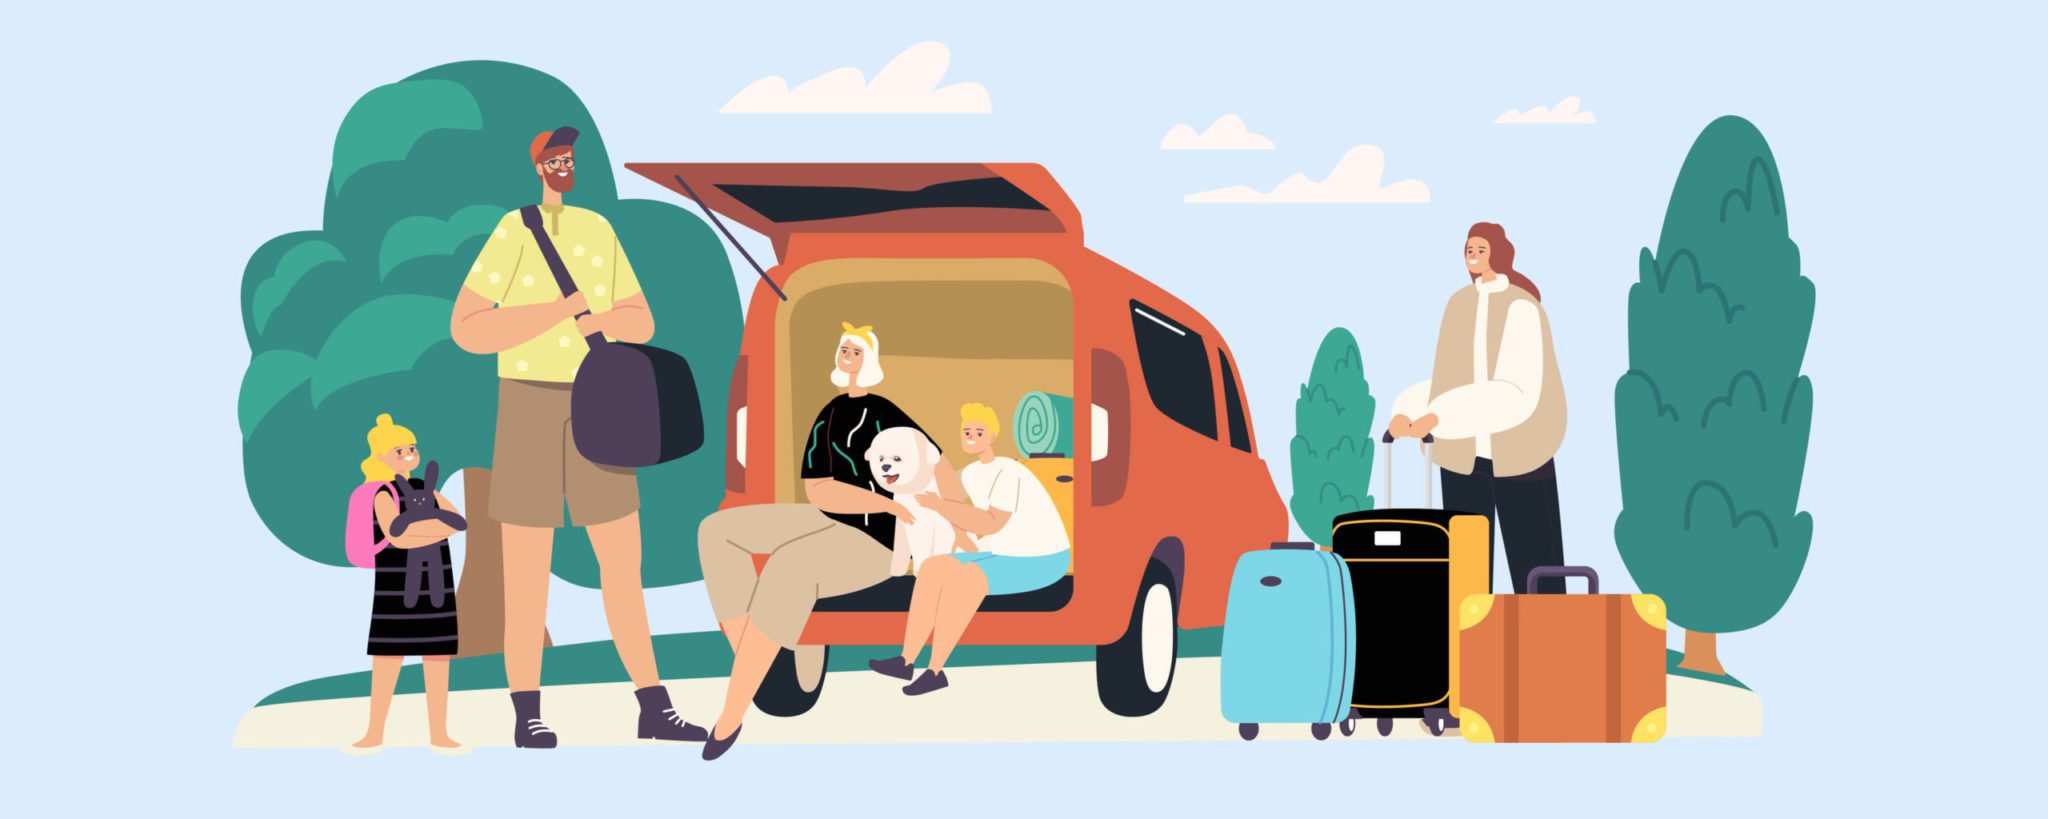 Saving Money on Vacation | color graphic of multigenerational family loading vehicle with luggage